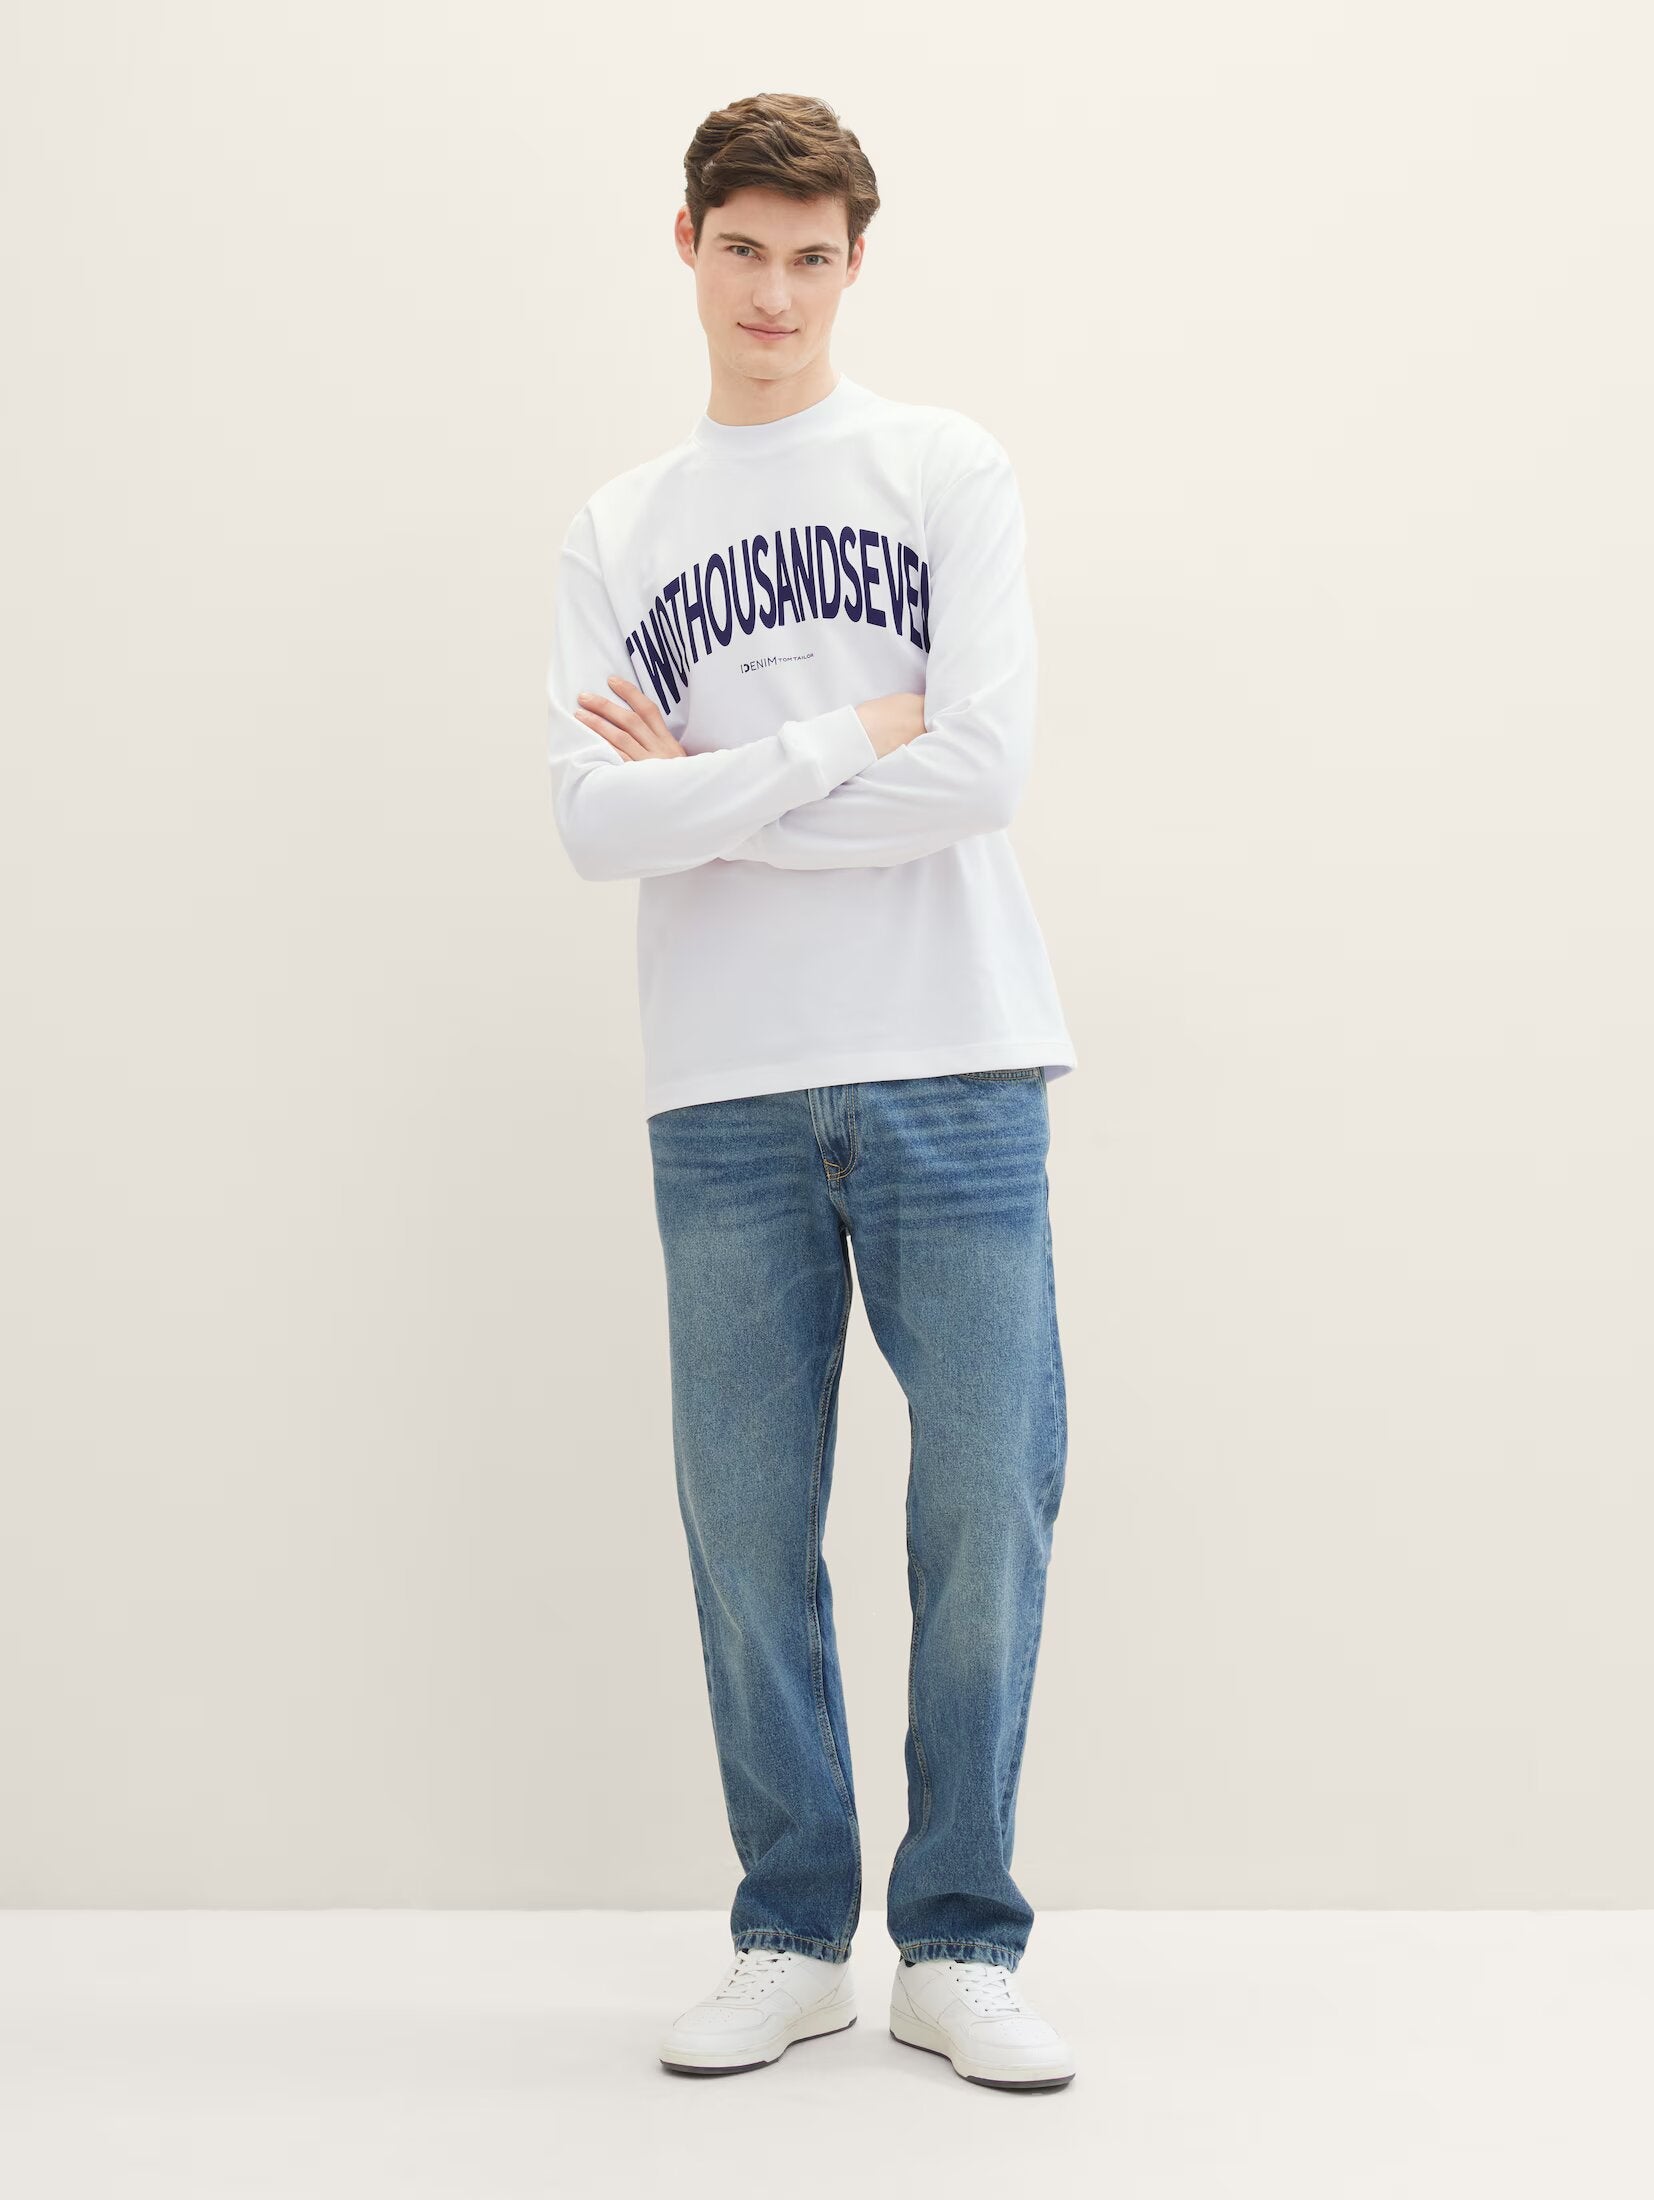 Tom Tailor White Sweatshirt With a Text Print